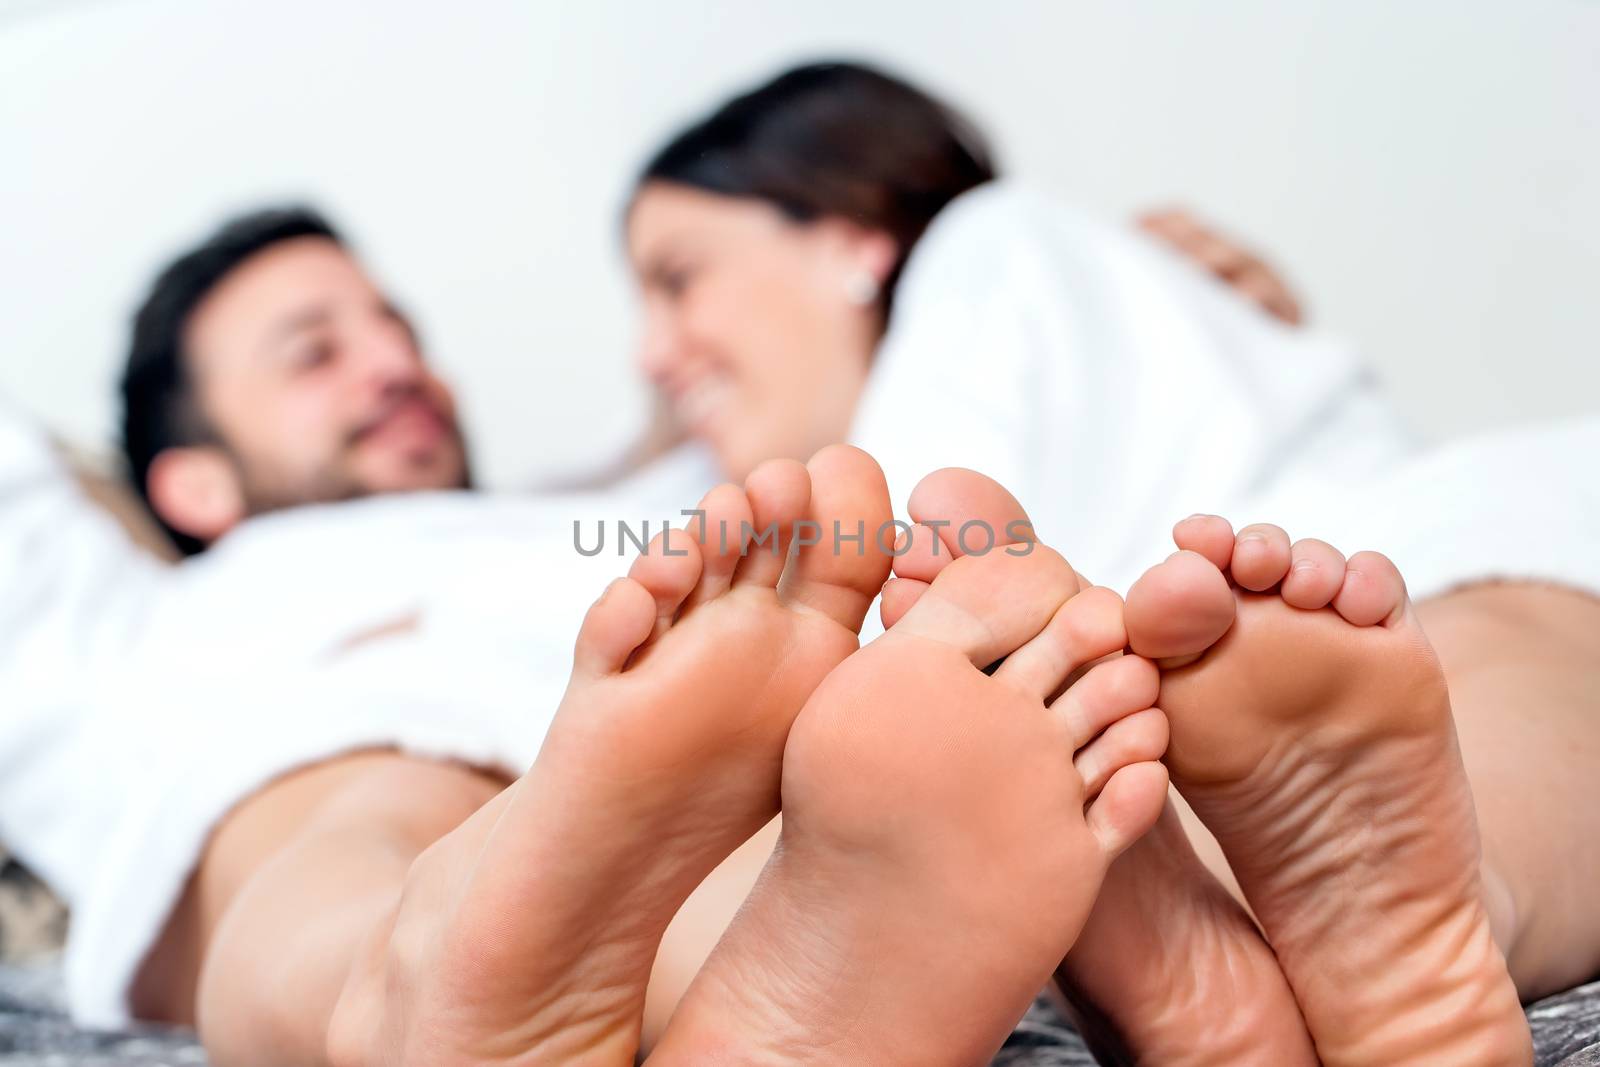 Close up detail of human feet together with out of focus laughing couple in background.